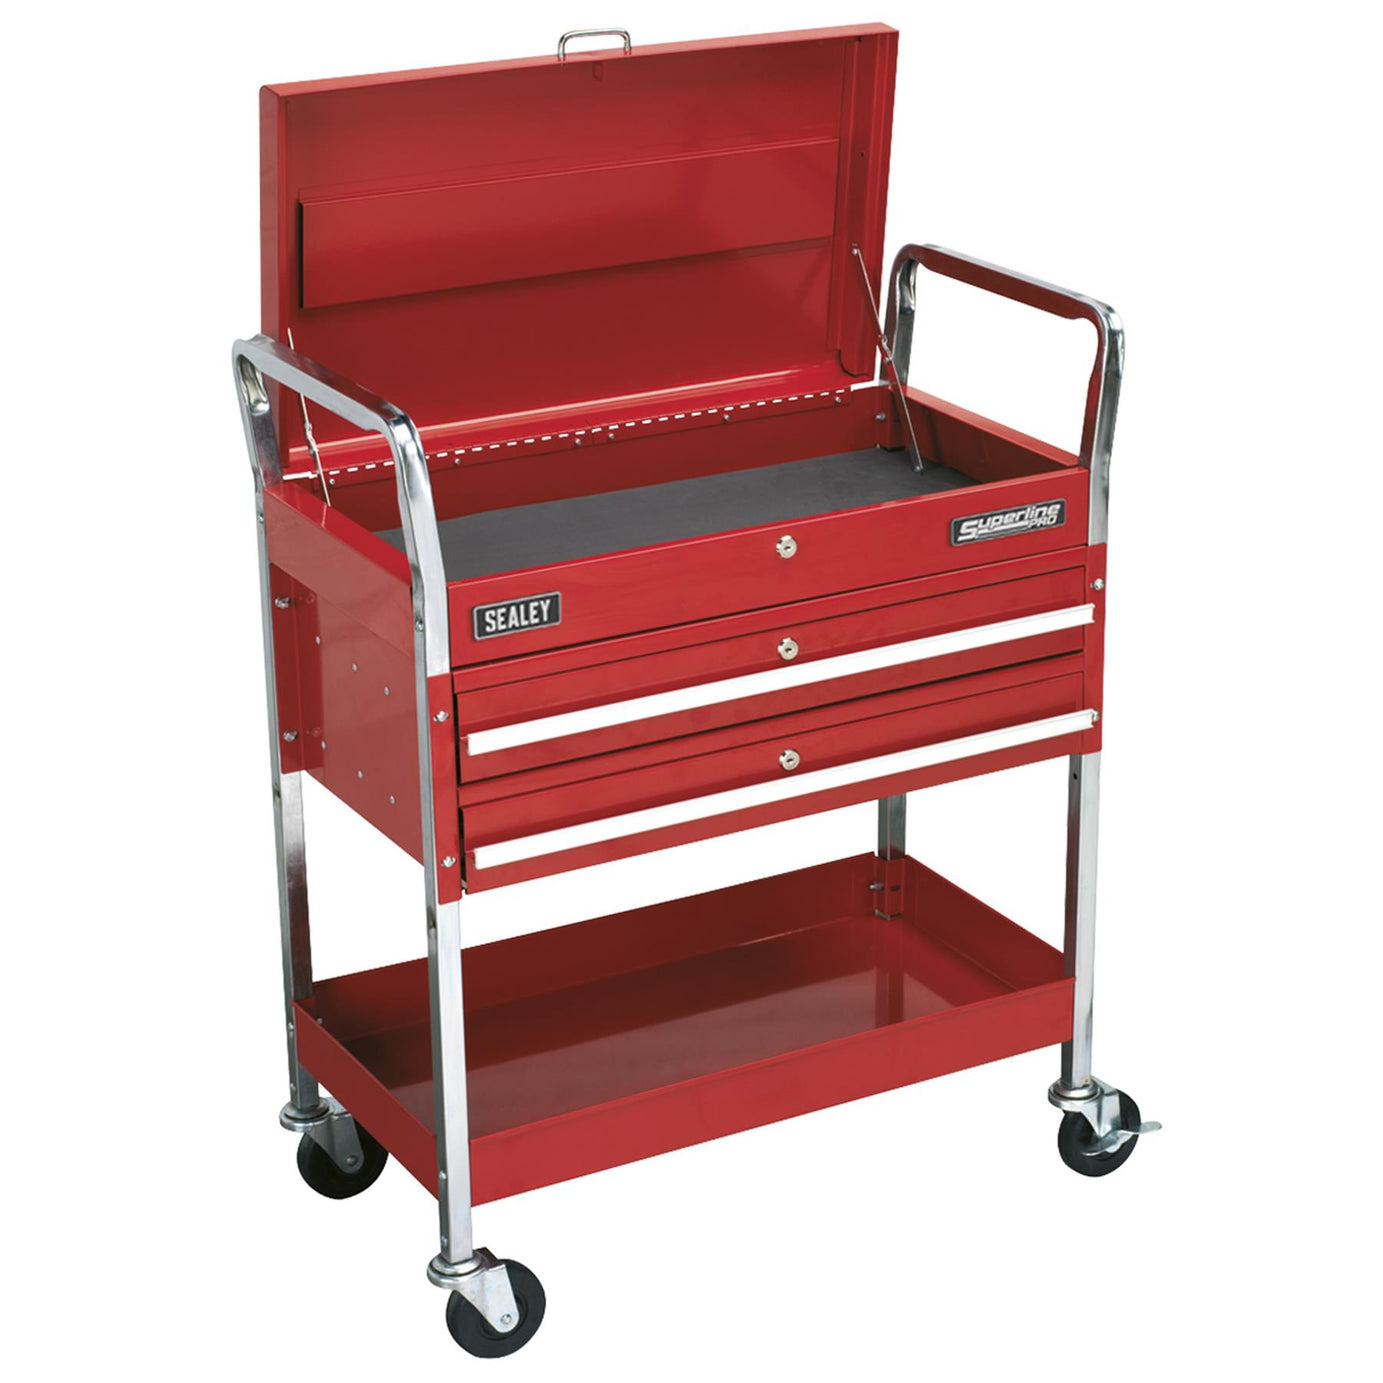 Sealey Trolley 2-Level Heavy-Duty with Lockable Top & 2 Drawers